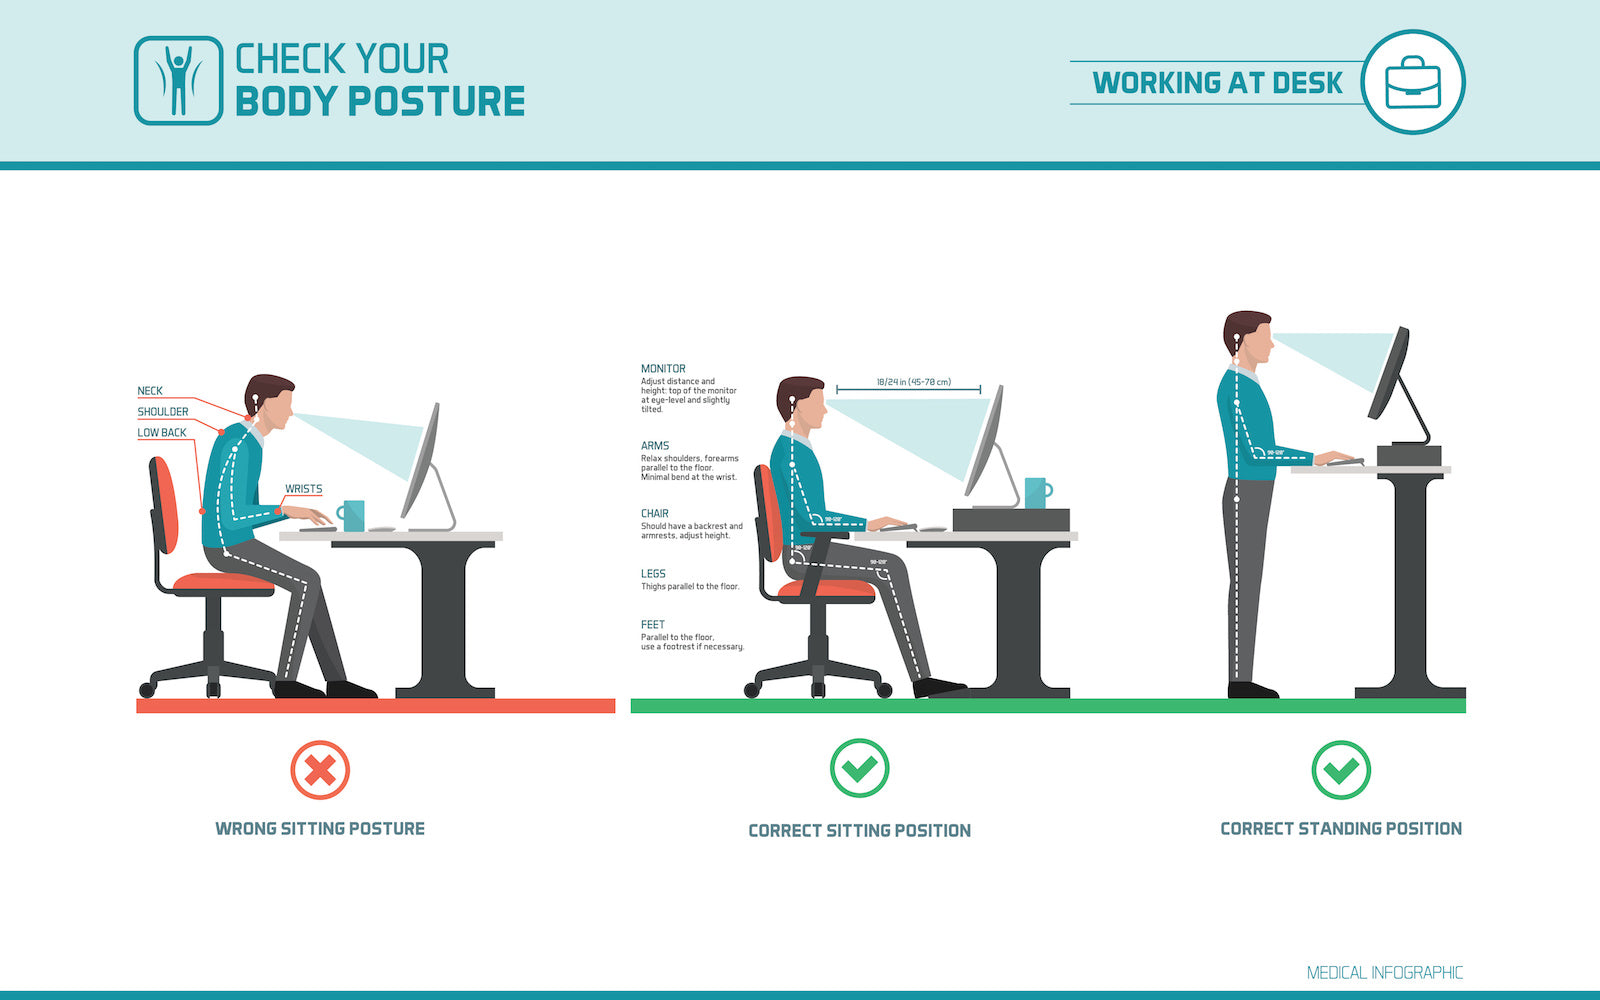 Proper Body Posture at desk while sitting and standing - info graphic